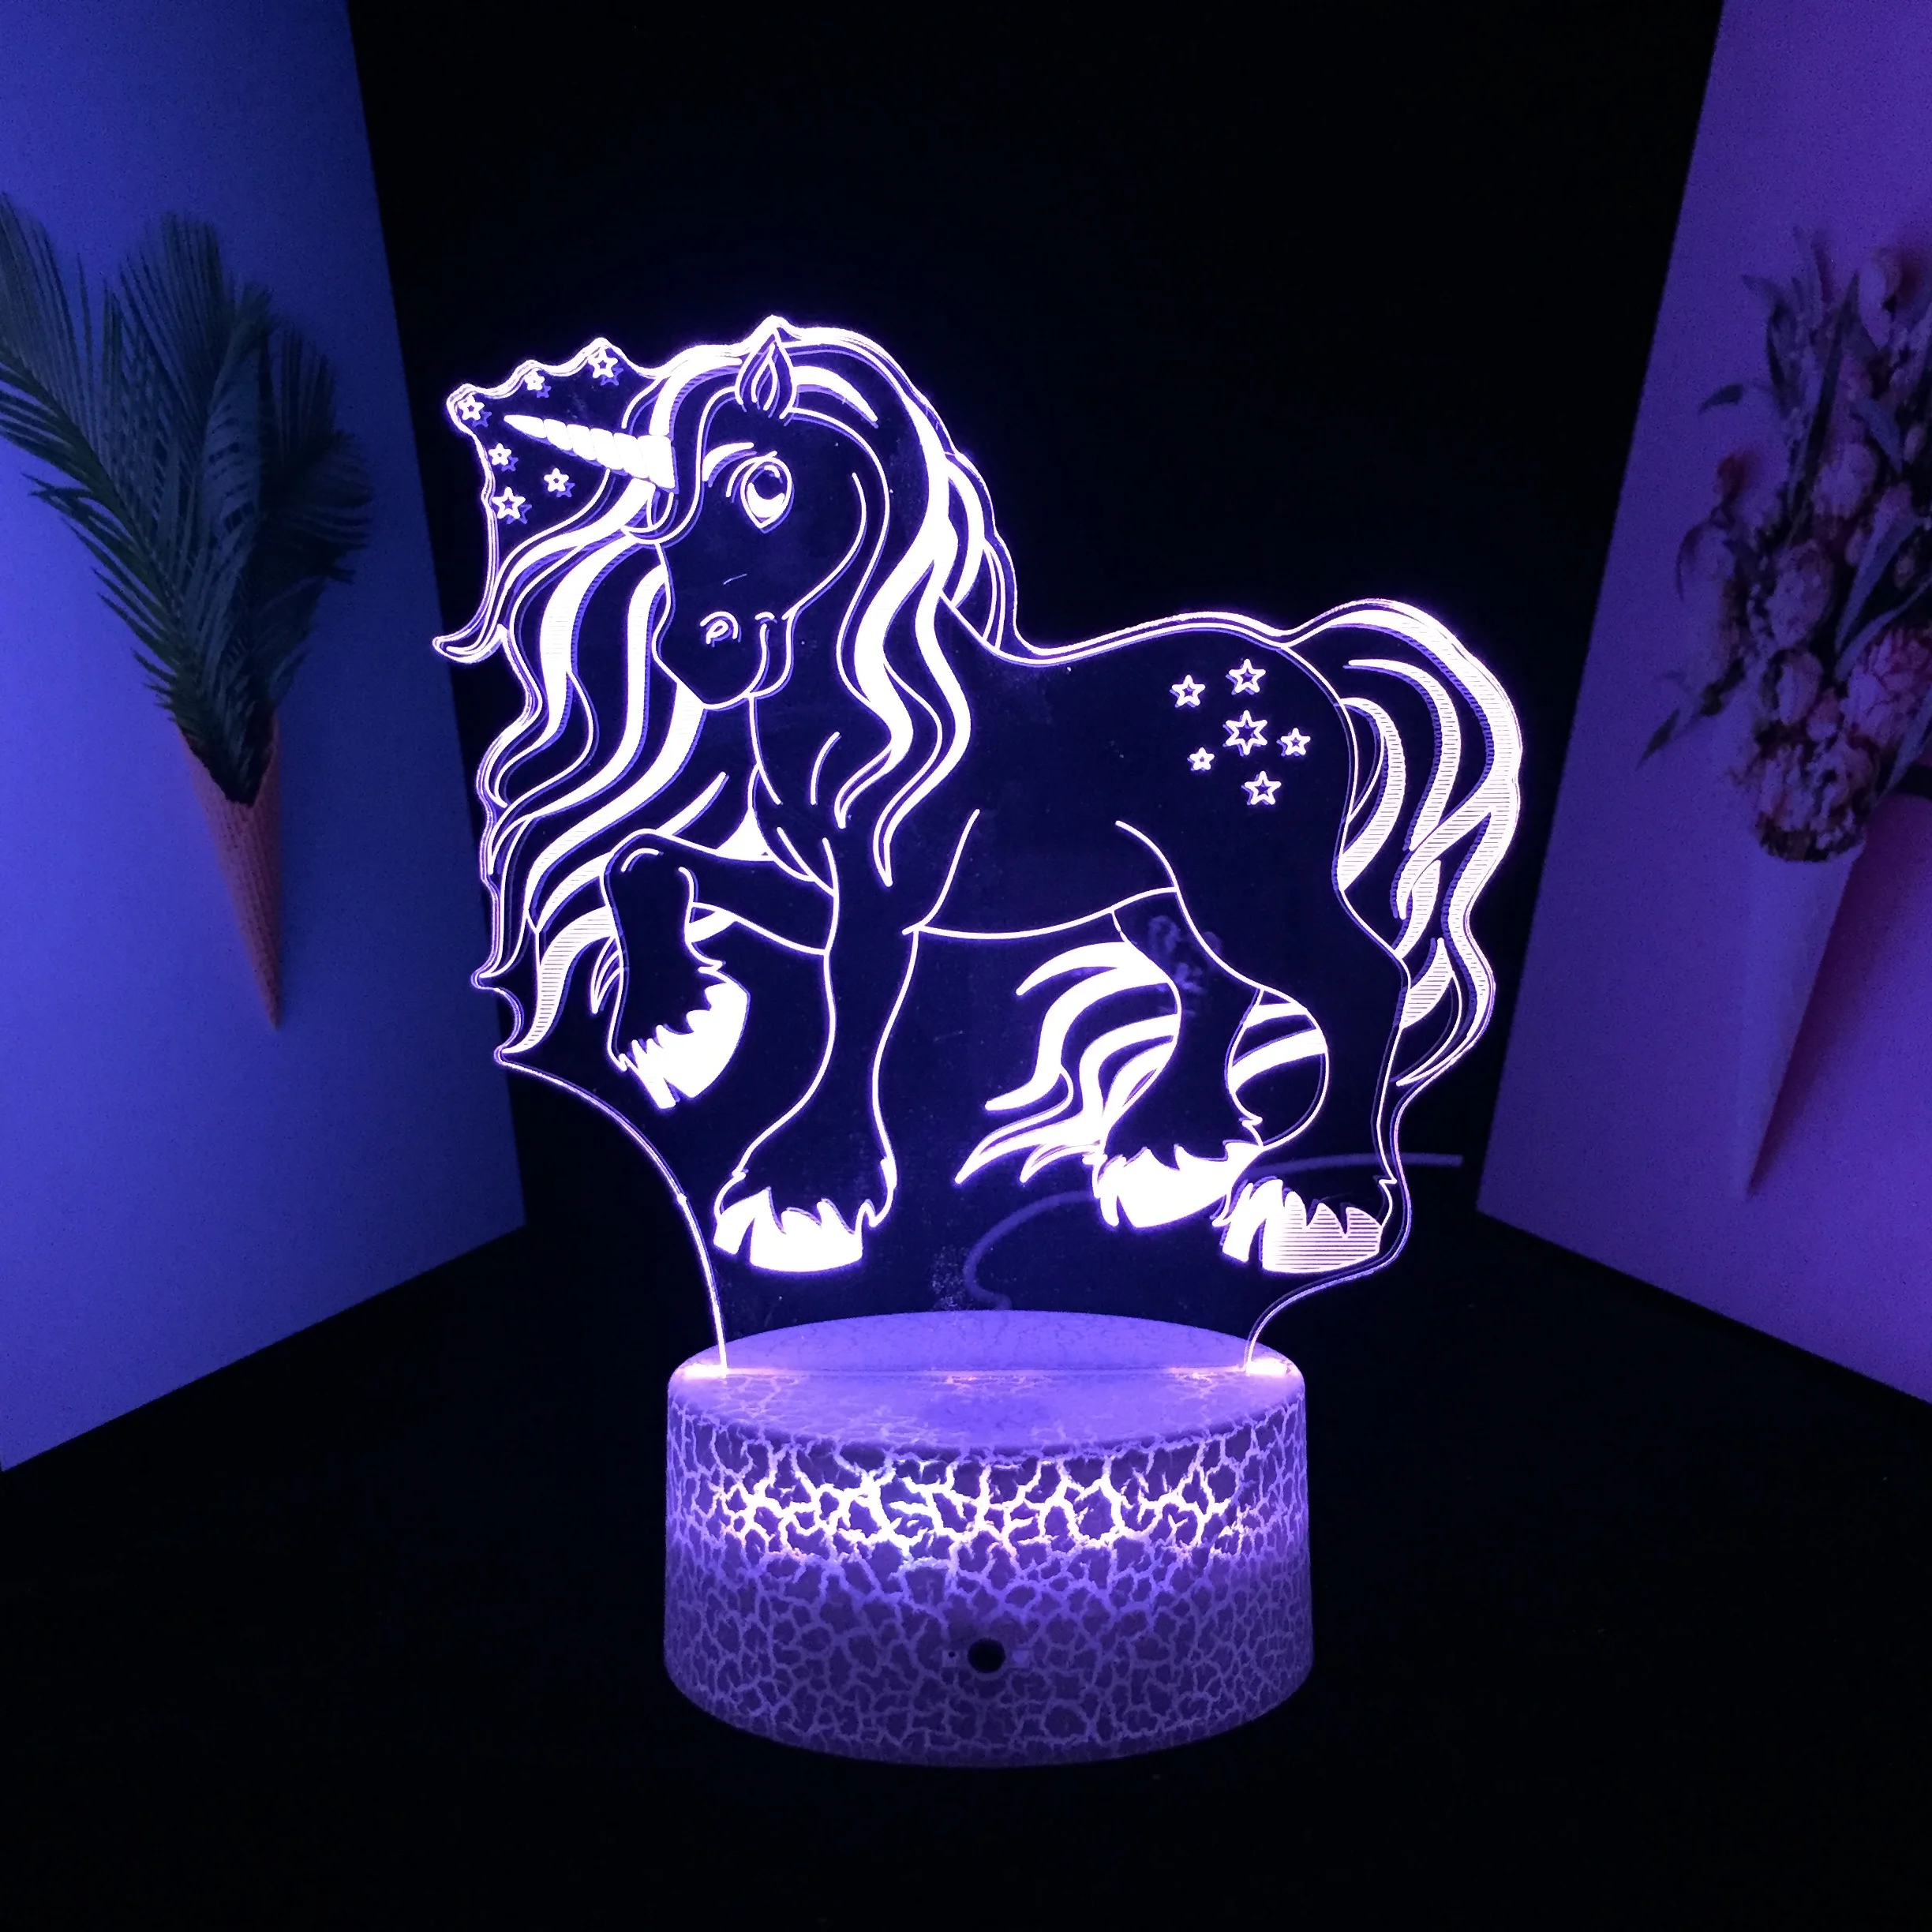 

Animal Series Little Unicorn With A Five-Pointed Star 3D LED Lamp Visual Illusion White Cracked Base for Festival Birthday Gifts